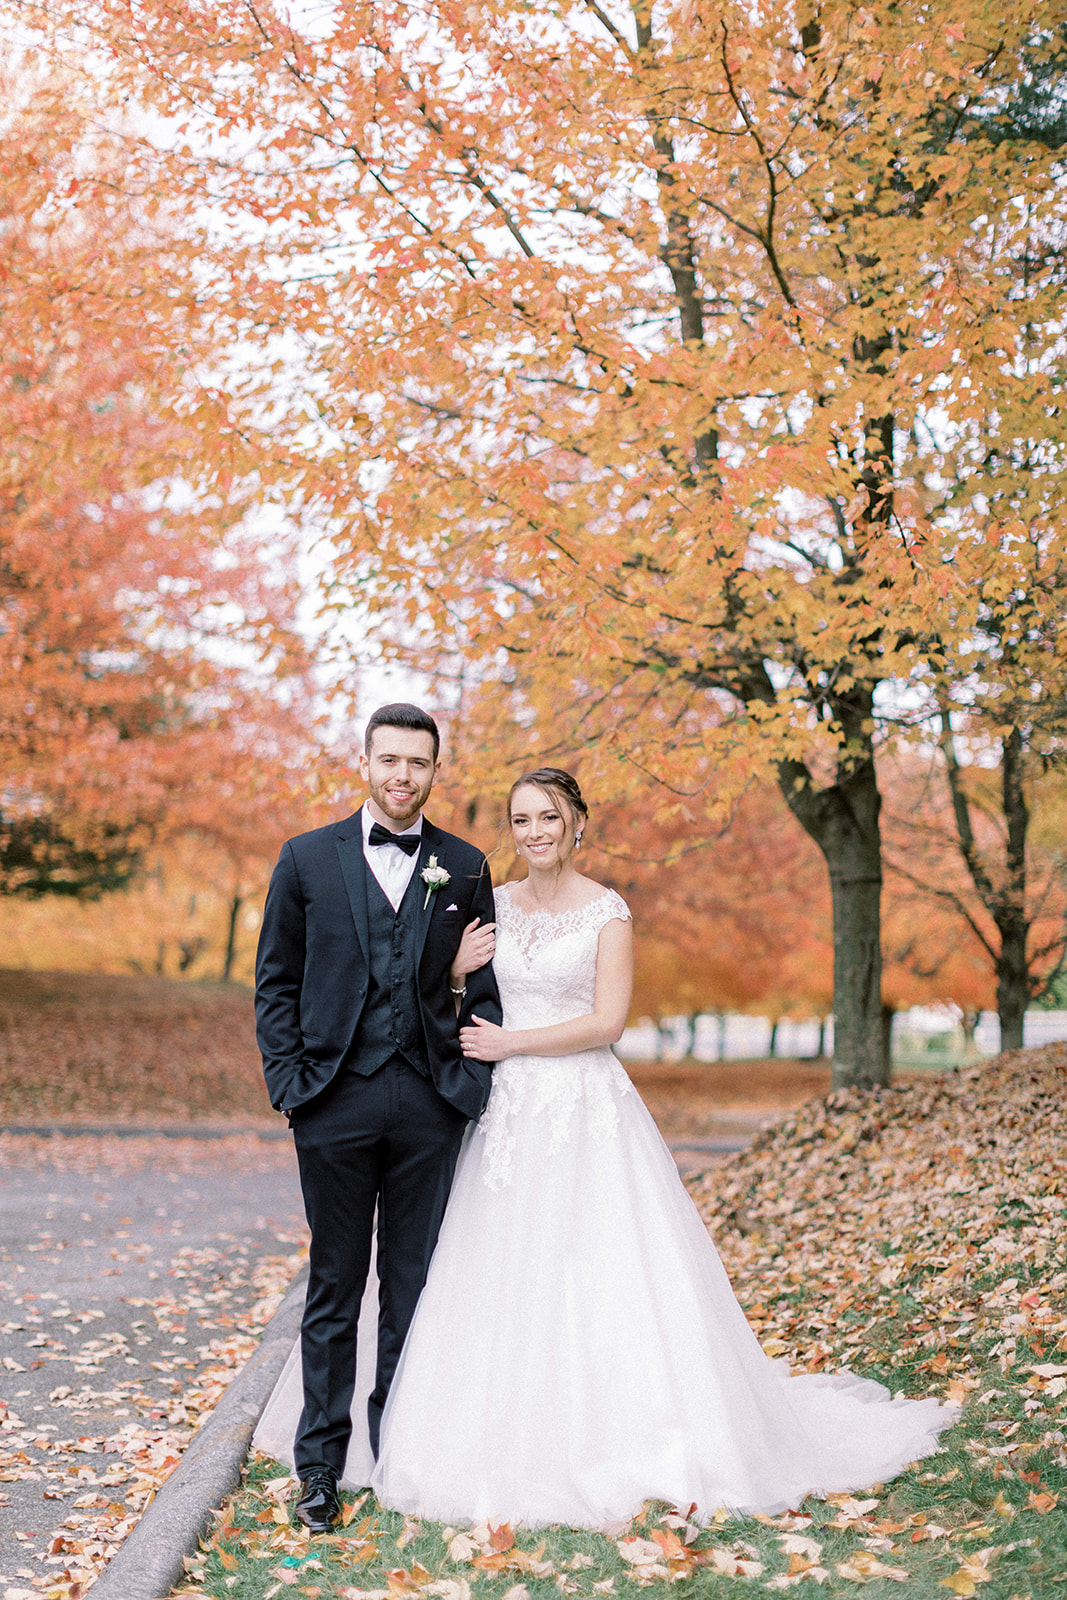 Pennsylvania wedding photographer captures bride and groom outdoors during fall outdoor wedding portraits